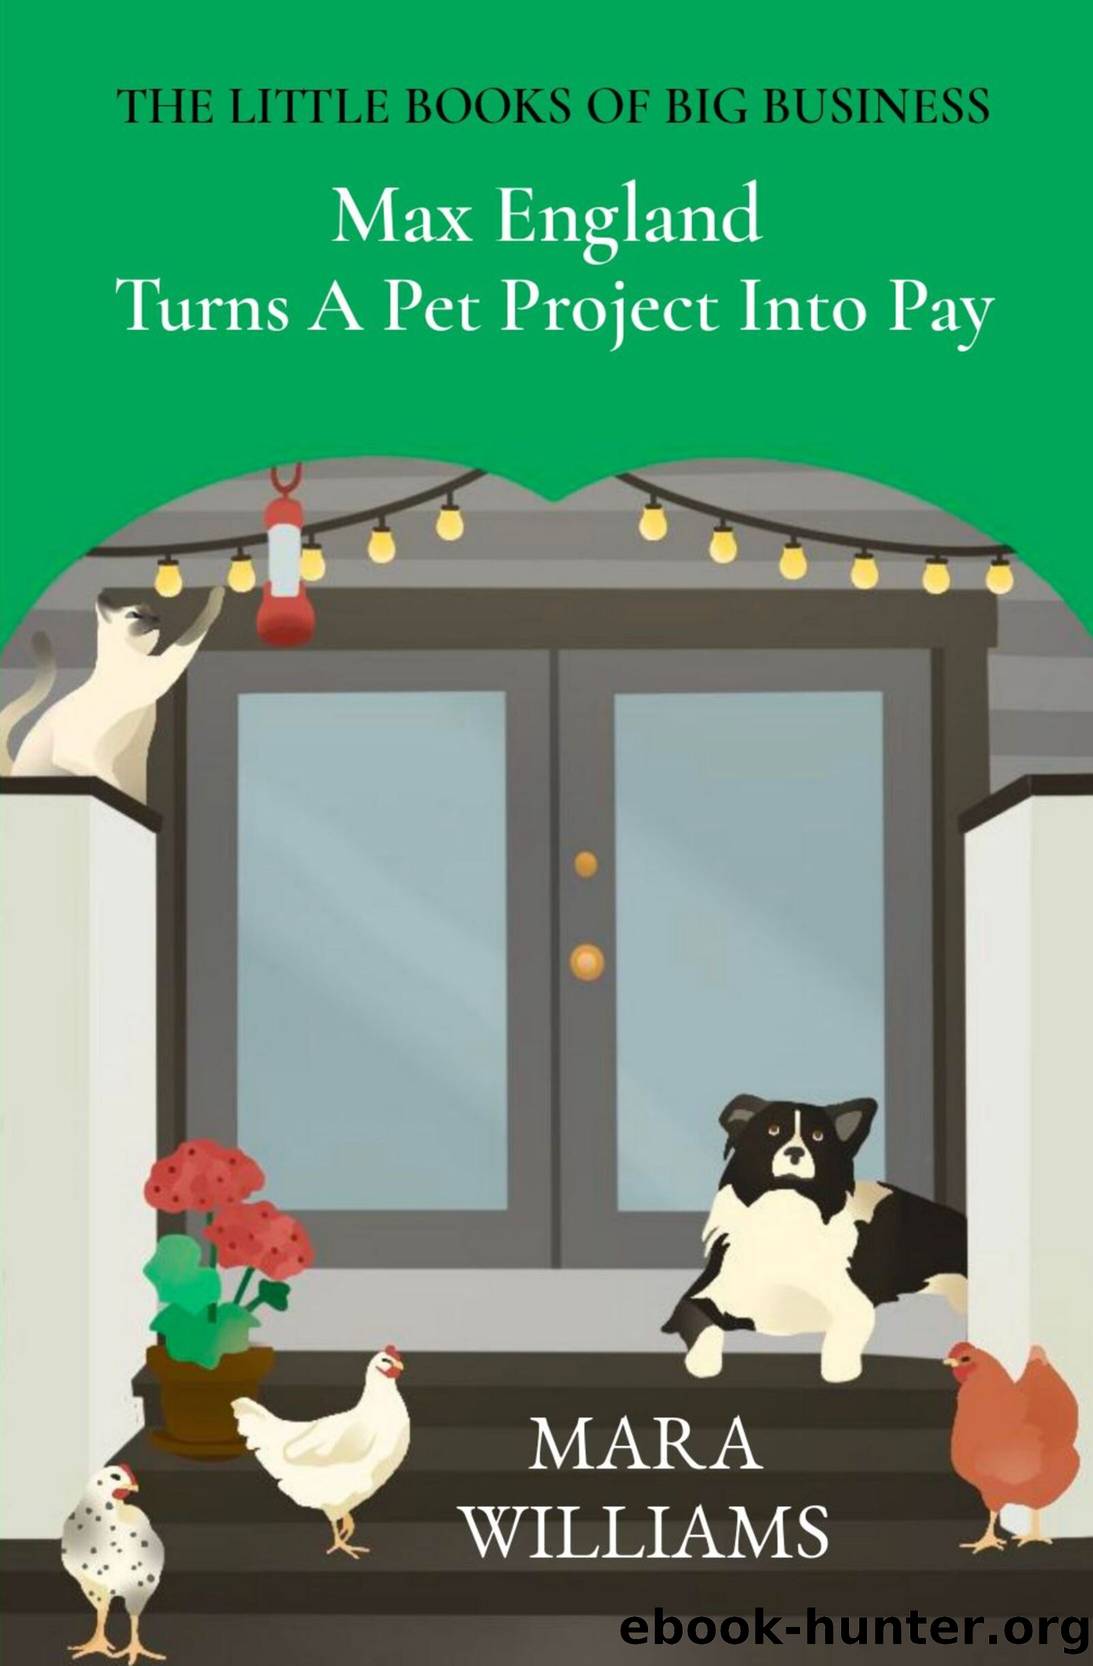 Max England Turns a Pet Project Into Pay by Mara Williams